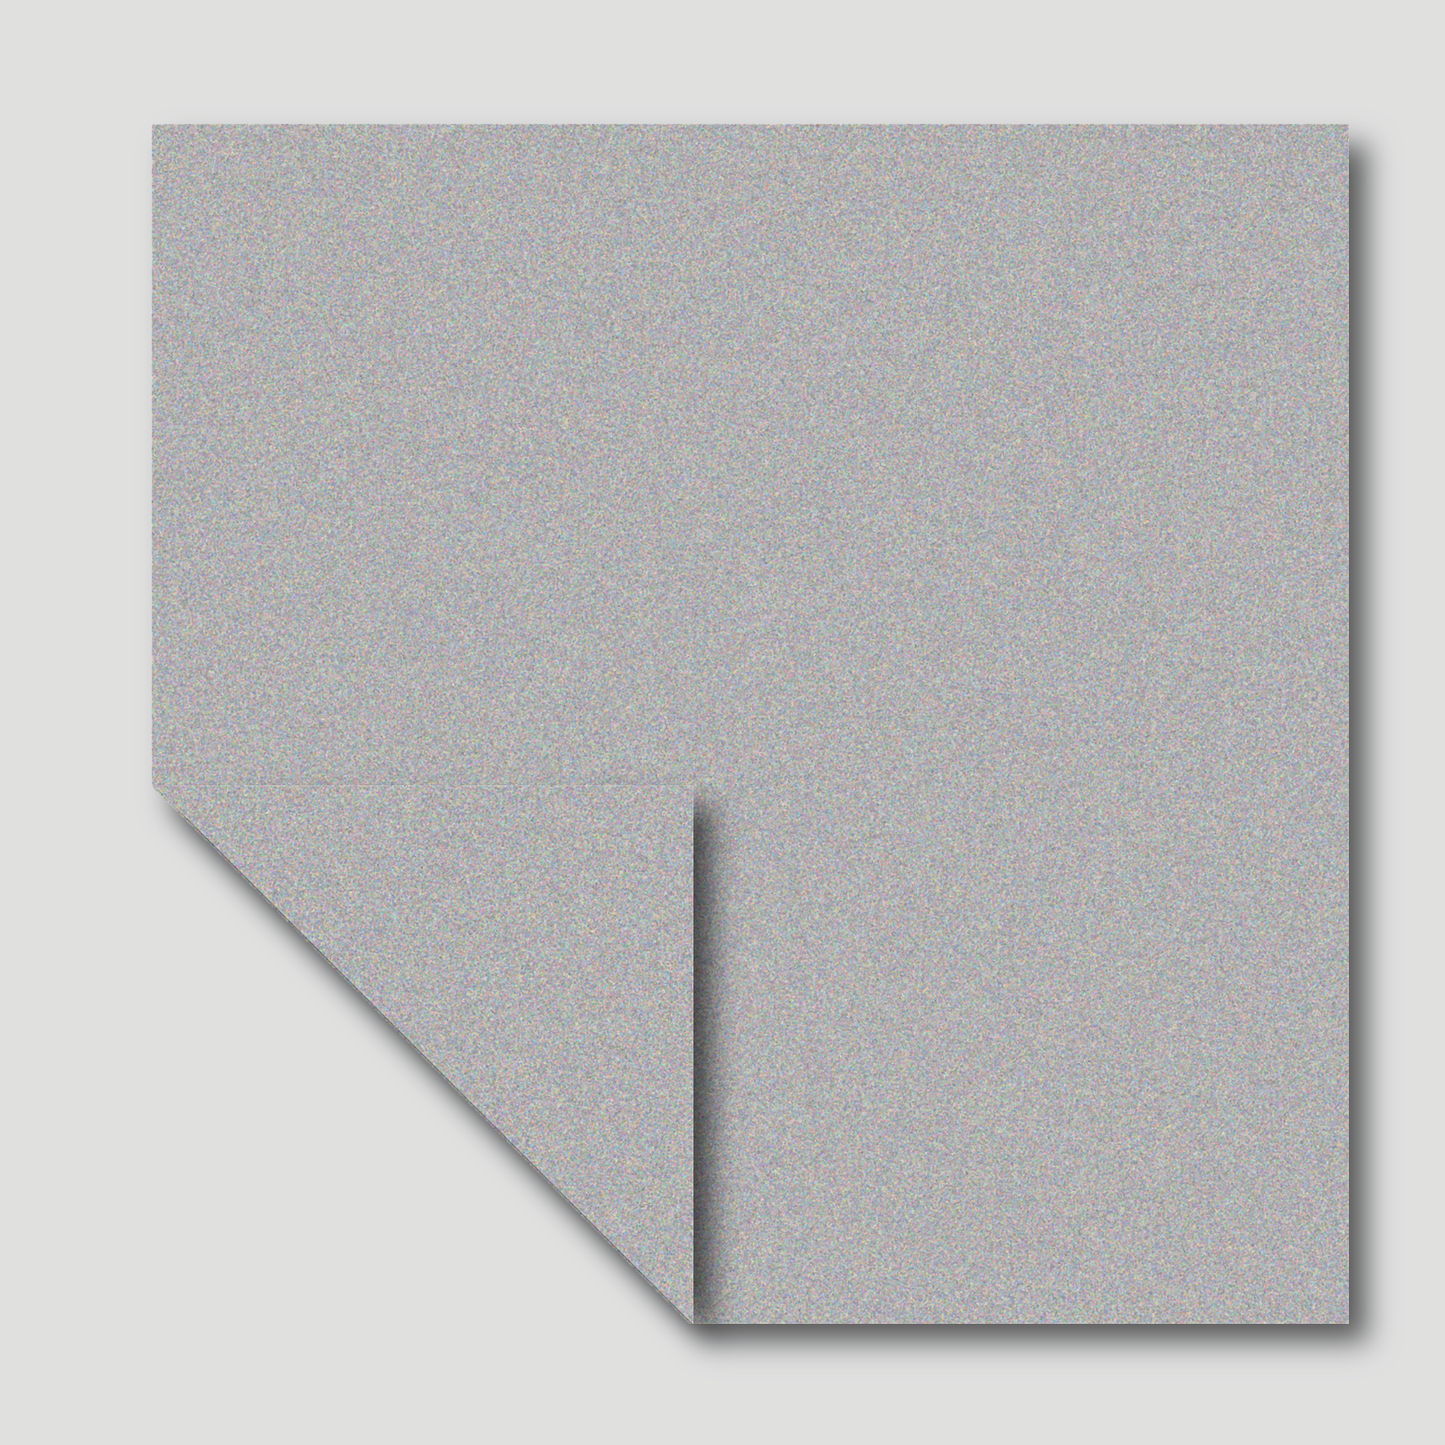 [Taro's Origami Studio] Biotope Jumbo 13.75 Inch / 35cm Single Color (Stone Gray) 10 Sheets (All Same Color) Premium Japanese Paper for Advanced Folders (Made in Japan)